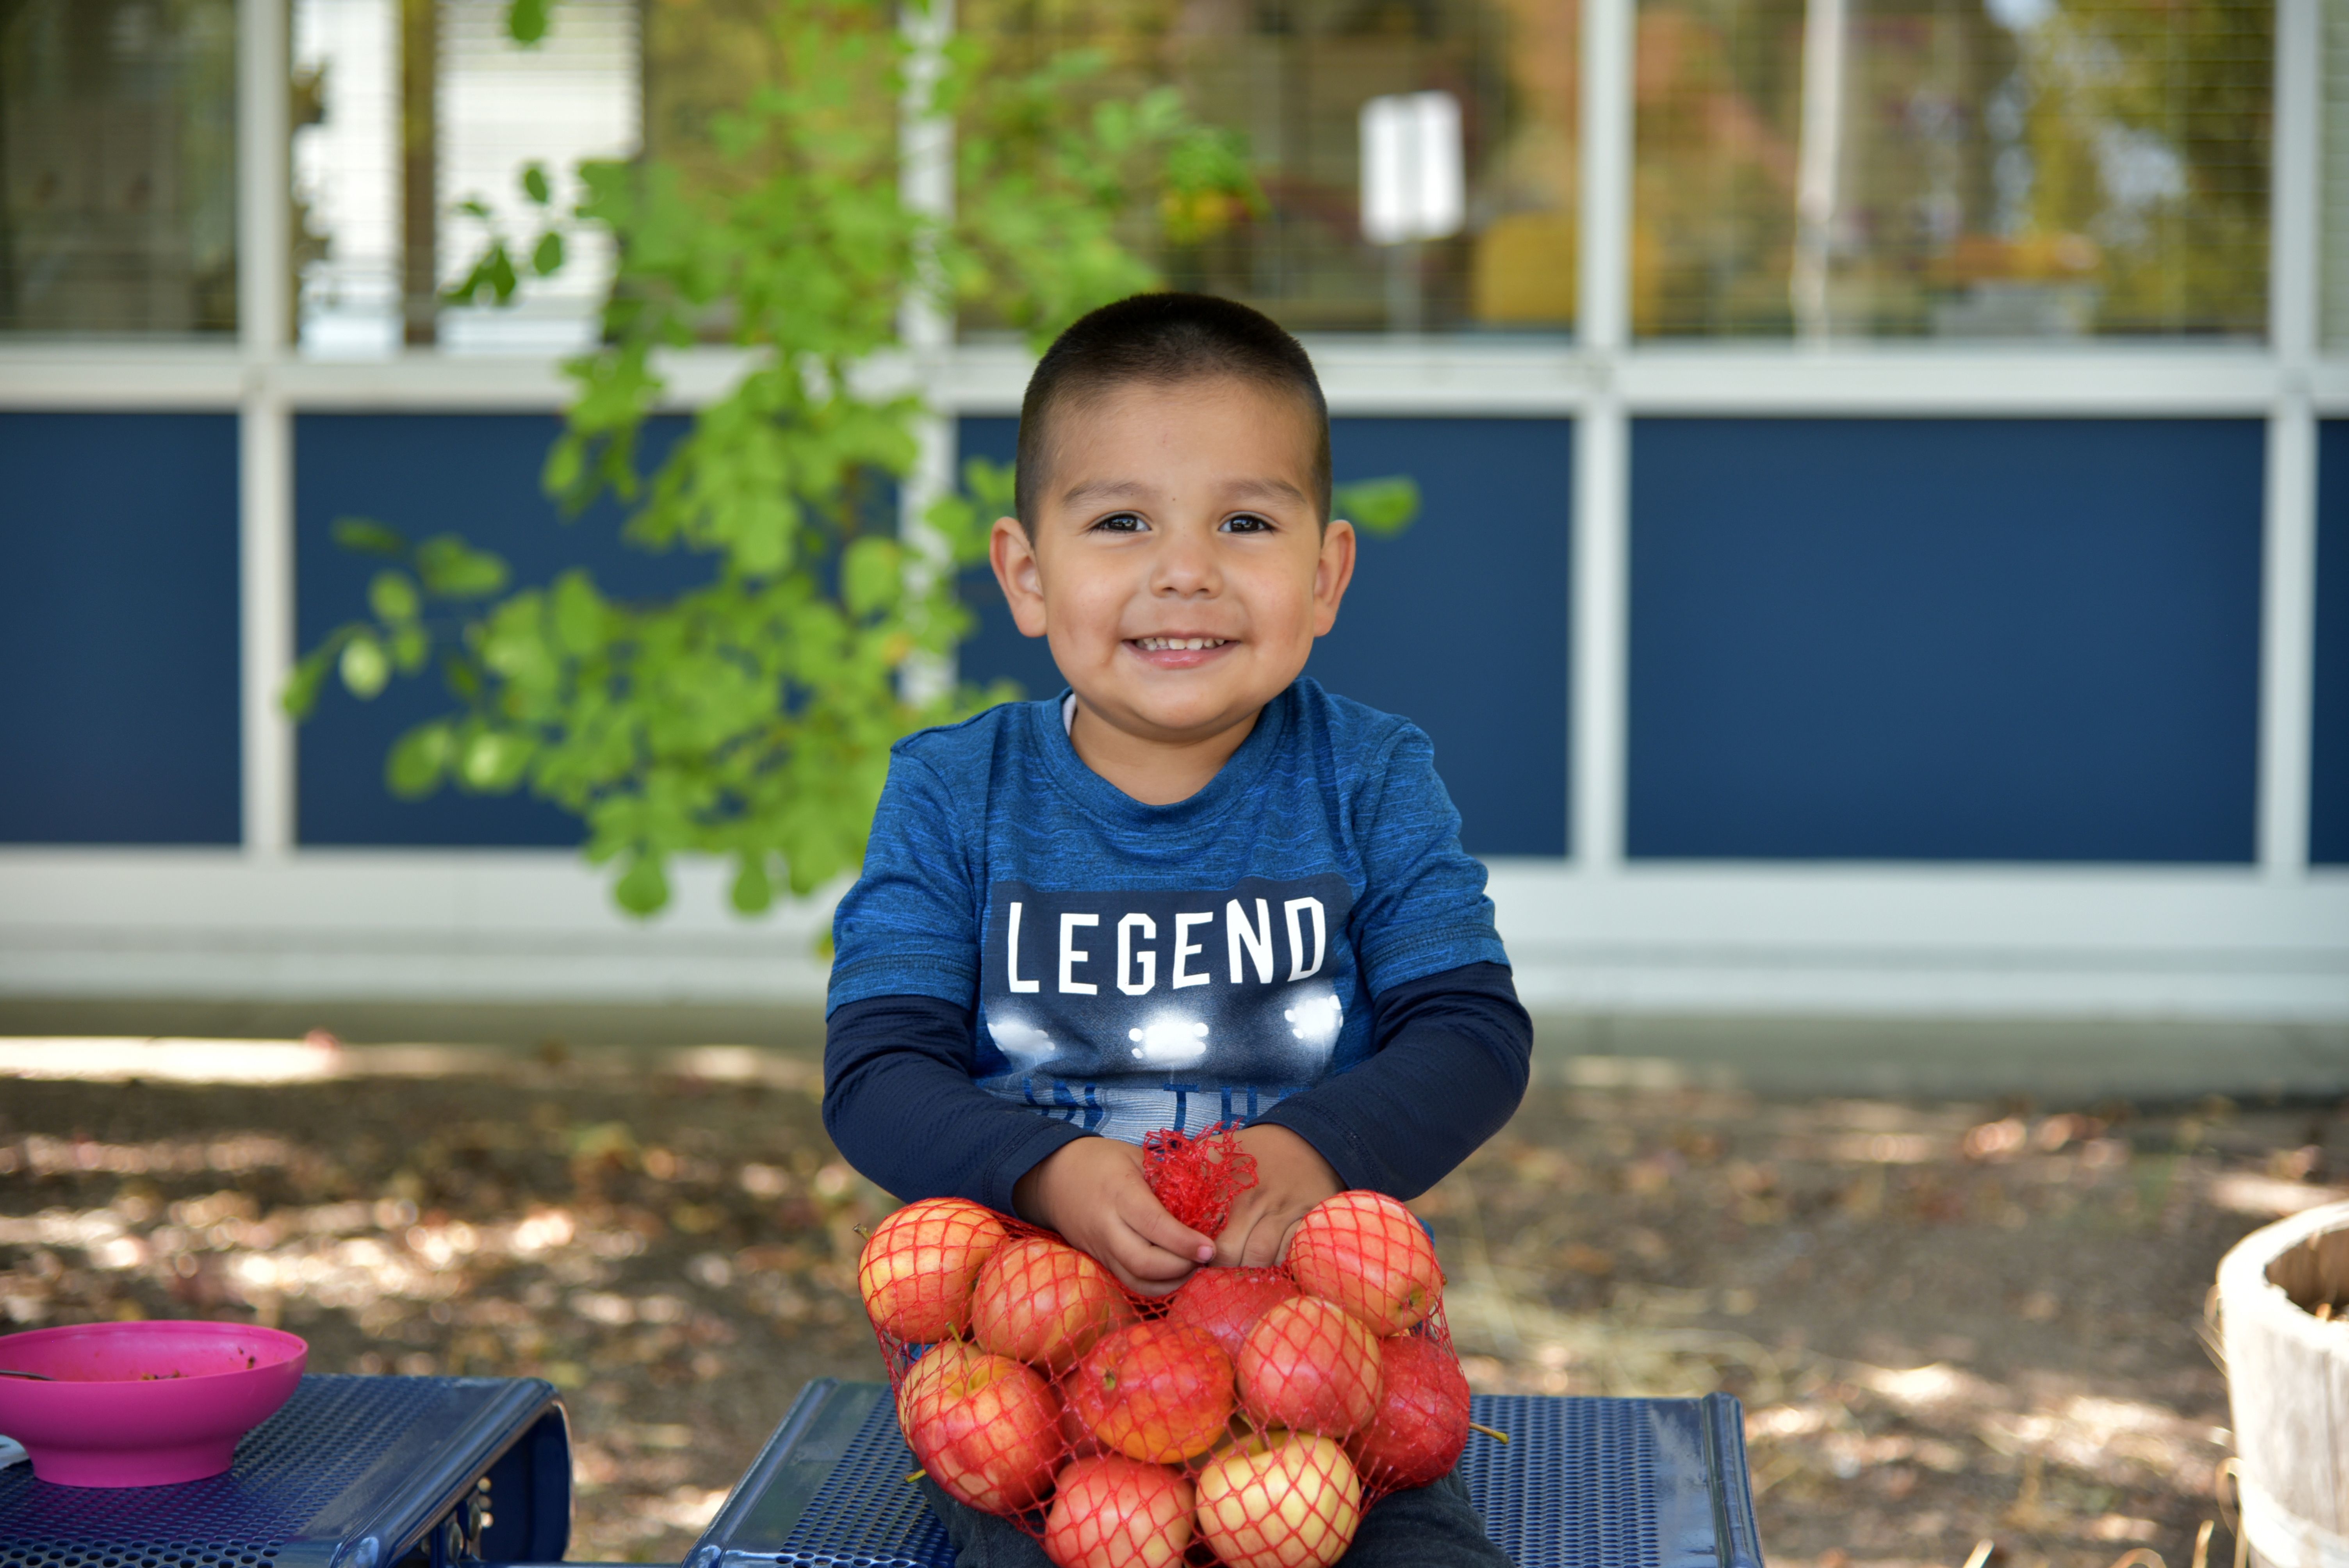 Young boy smiling and holding a bag of apples